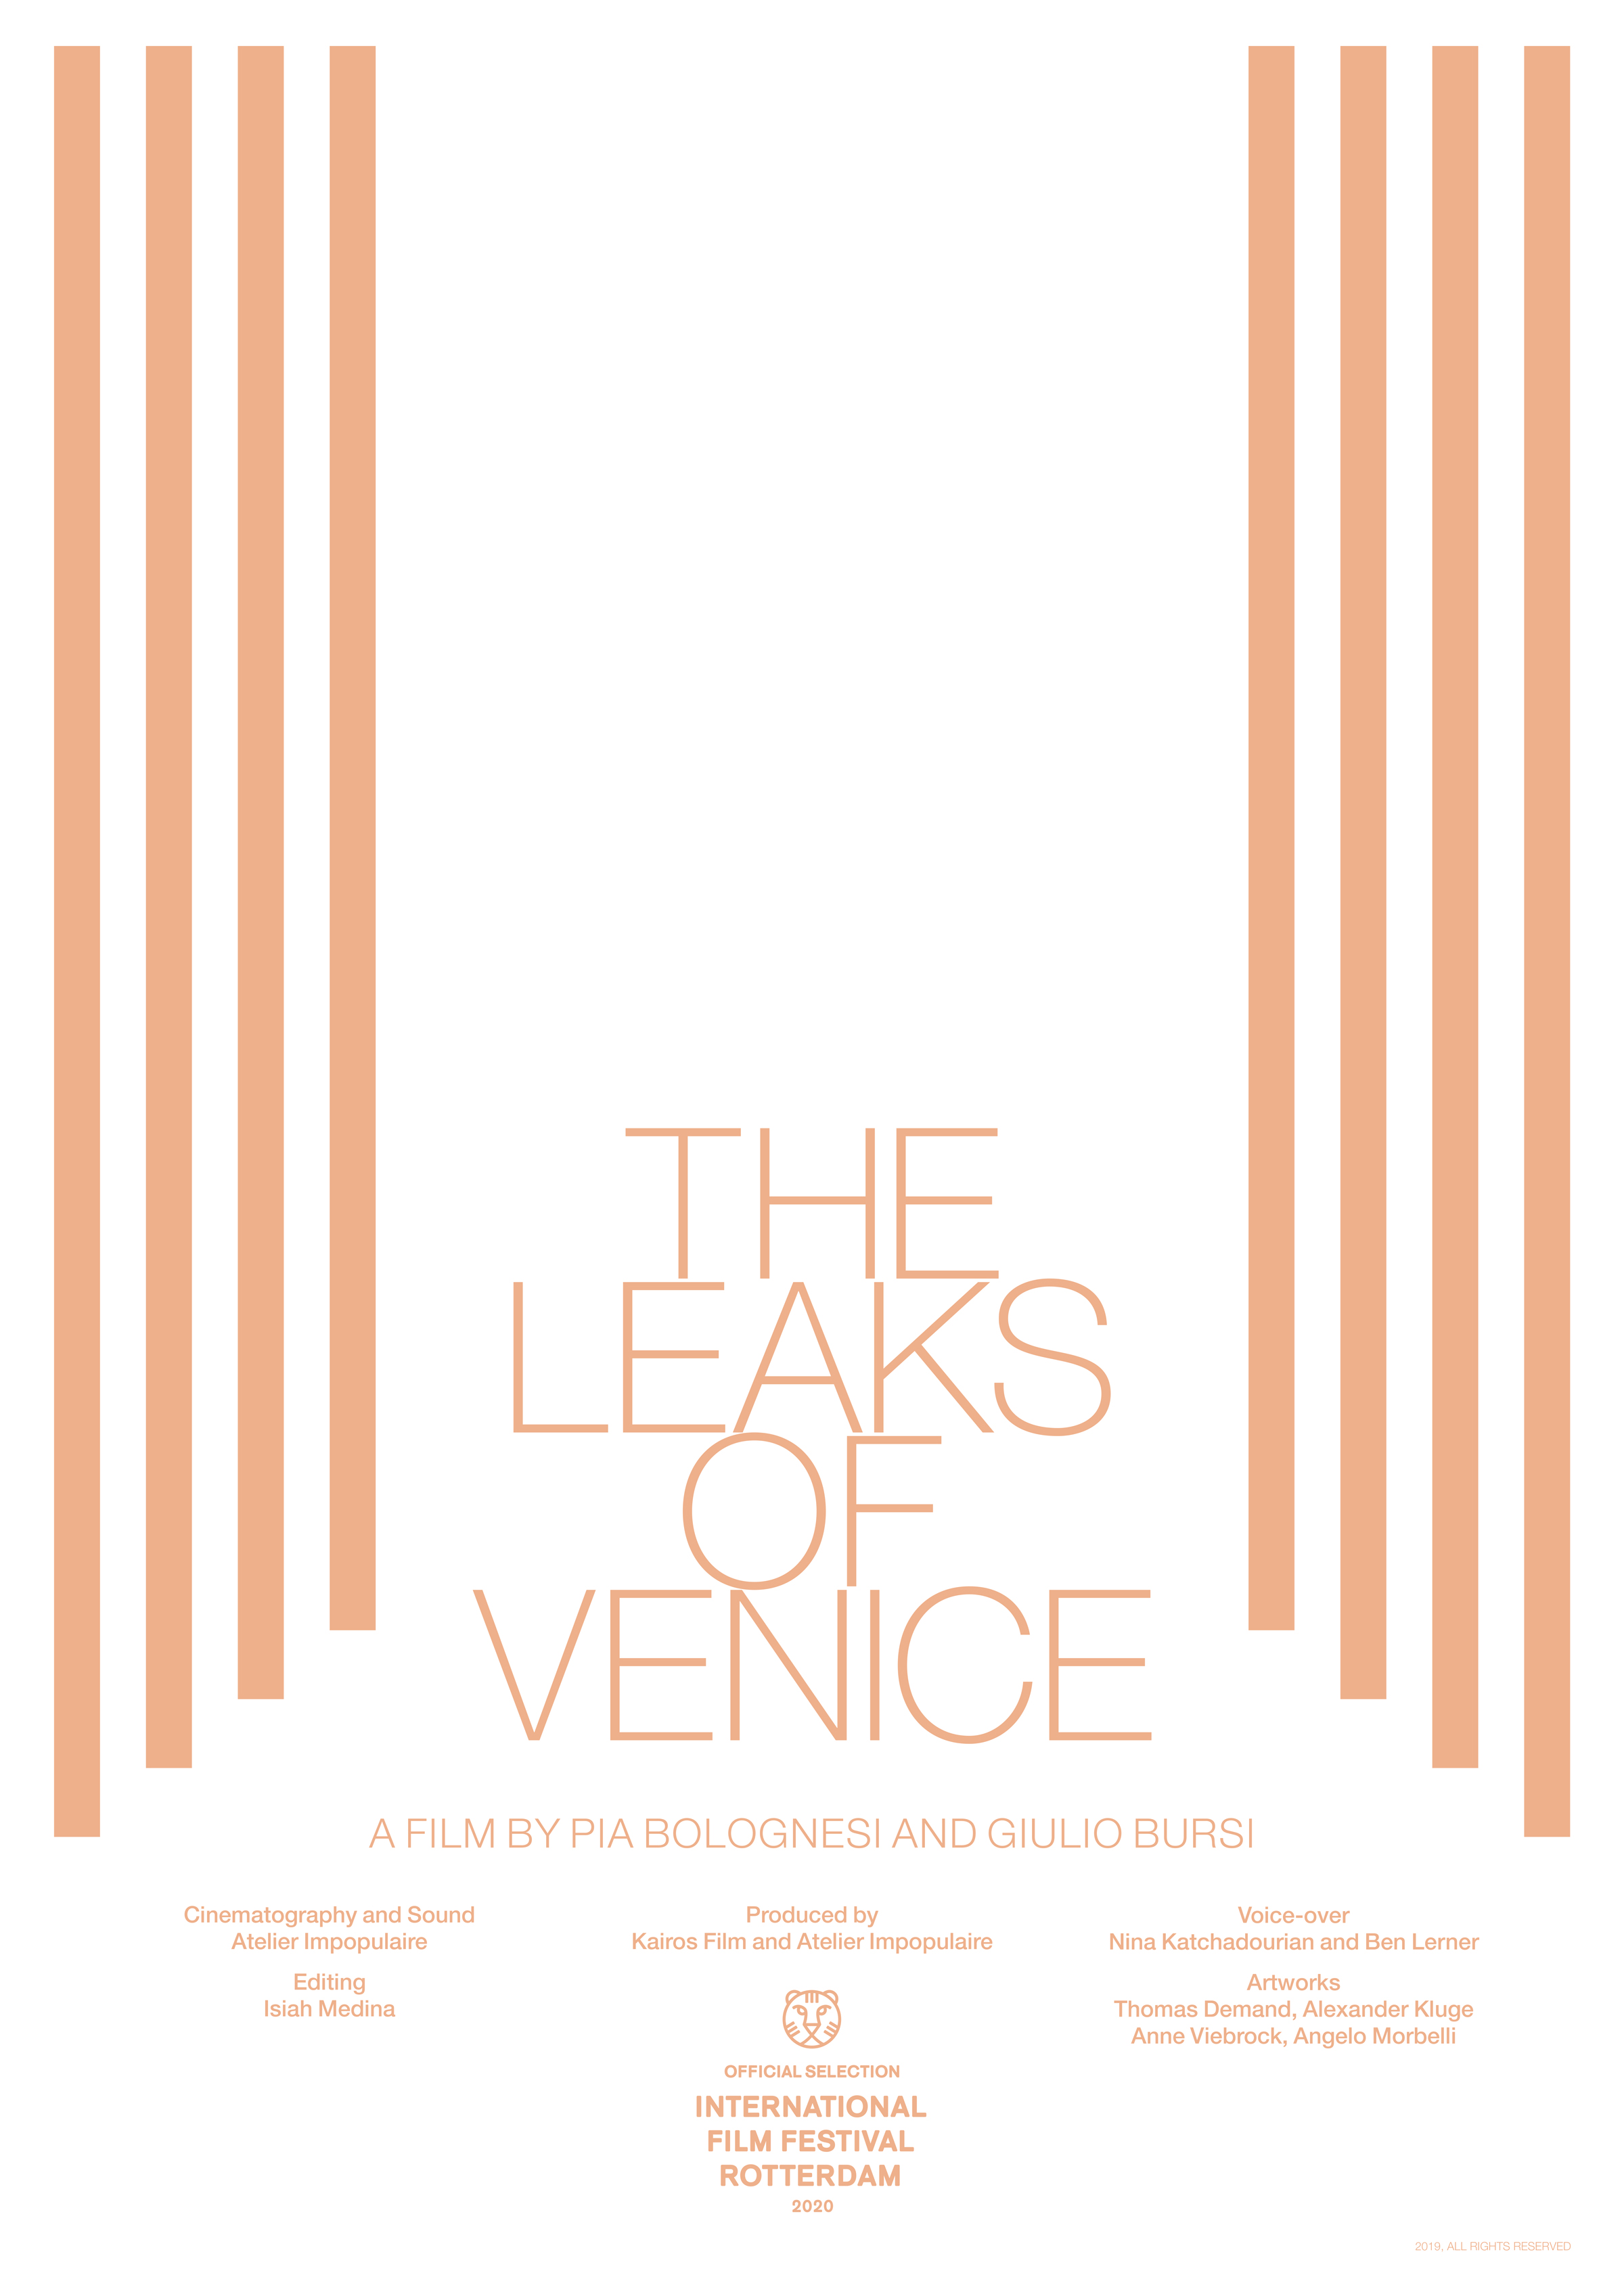 THE LEAKS OF VENICE — Atelier Impopulaire